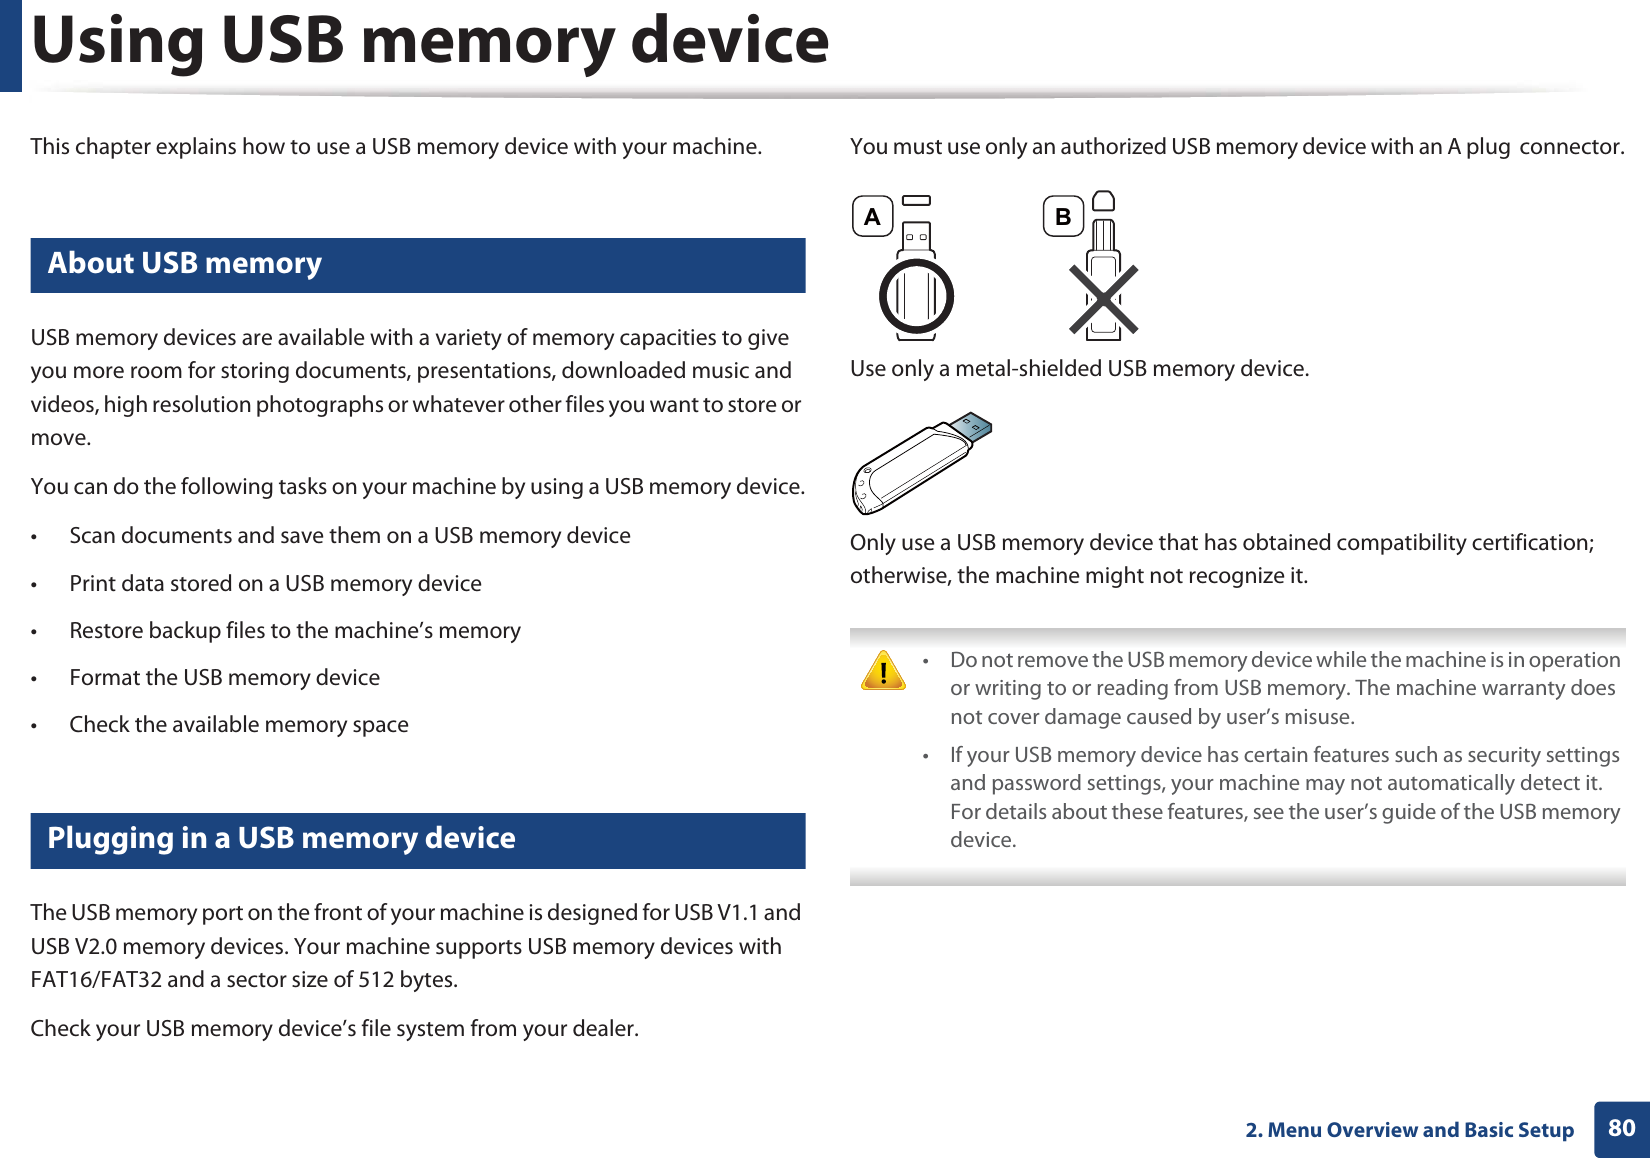 802. Menu Overview and Basic SetupUsing USB memory deviceThis chapter explains how to use a USB memory device with your machine.24 About USB memoryUSB memory devices are available with a variety of memory capacities to give you more room for storing documents, presentations, downloaded music and videos, high resolution photographs or whatever other files you want to store or move.You can do the following tasks on your machine by using a USB memory device.• Scan documents and save them on a USB memory device• Print data stored on a USB memory device• Restore backup files to the machine’s memory• Format the USB memory device• Check the available memory space25 Plugging in a USB memory deviceThe USB memory port on the front of your machine is designed for USB V1.1 and USB V2.0 memory devices. Your machine supports USB memory devices with FAT16/FAT32 and a sector size of 512 bytes.Check your USB memory device’s file system from your dealer.You must use only an authorized USB memory device with an A plug  connector.Use only a metal-shielded USB memory device.Only use a USB memory device that has obtained compatibility certification; otherwise, the machine might not recognize it. • Do not remove the USB memory device while the machine is in operation or writing to or reading from USB memory. The machine warranty does not cover damage caused by user’s misuse. • If your USB memory device has certain features such as security settings and password settings, your machine may not automatically detect it. For details about these features, see the user’s guide of the USB memory device. A B